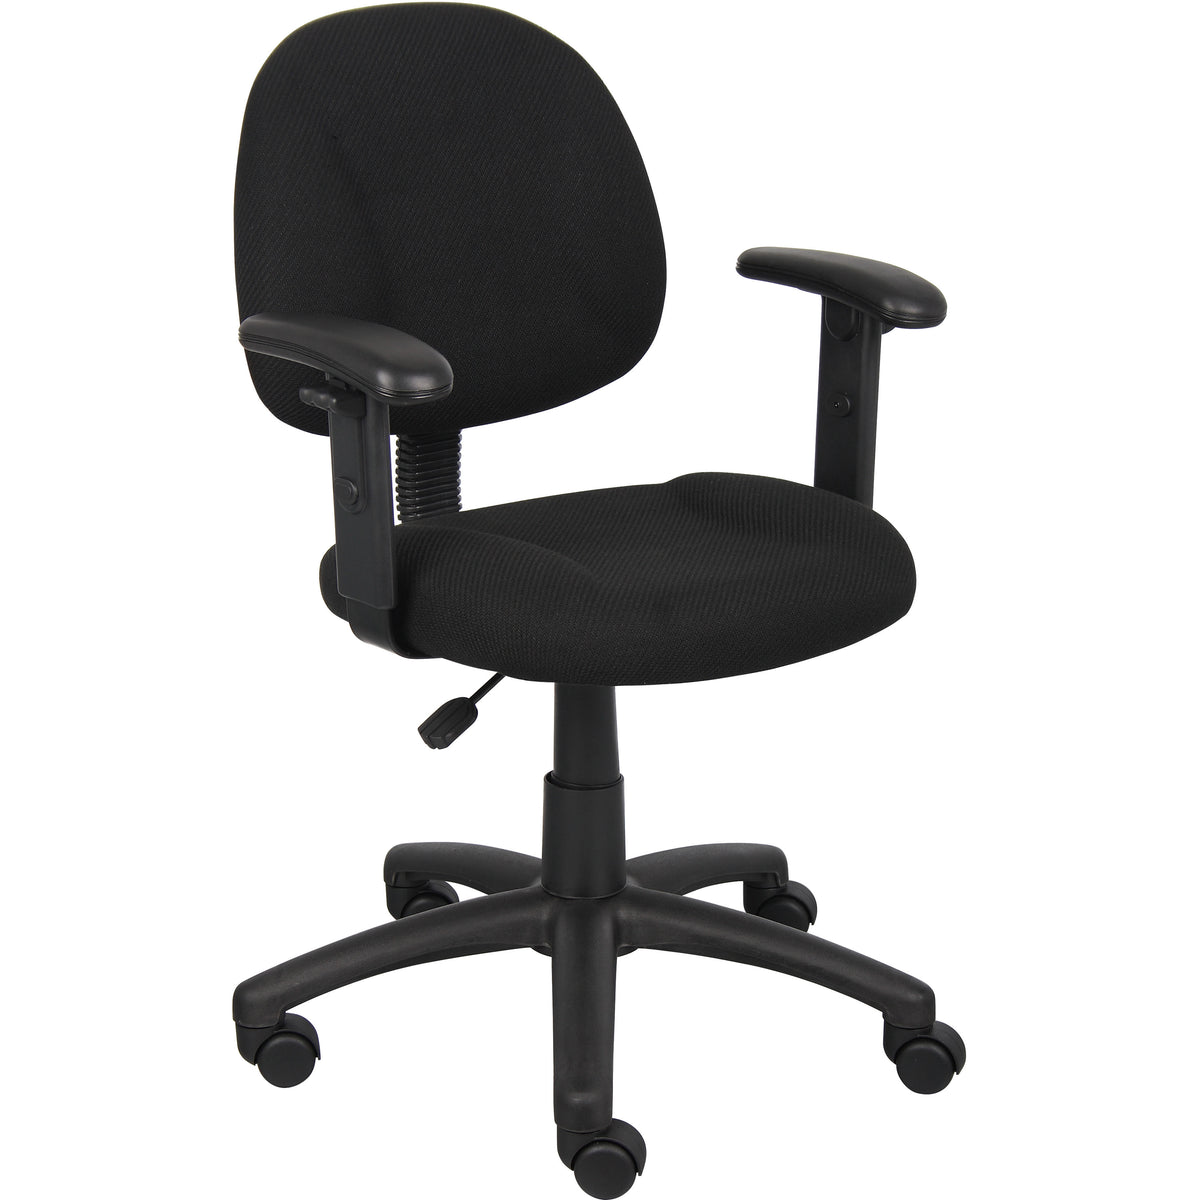 Black Deluxe Posture Chair with Adjustable Arms, B316-BK